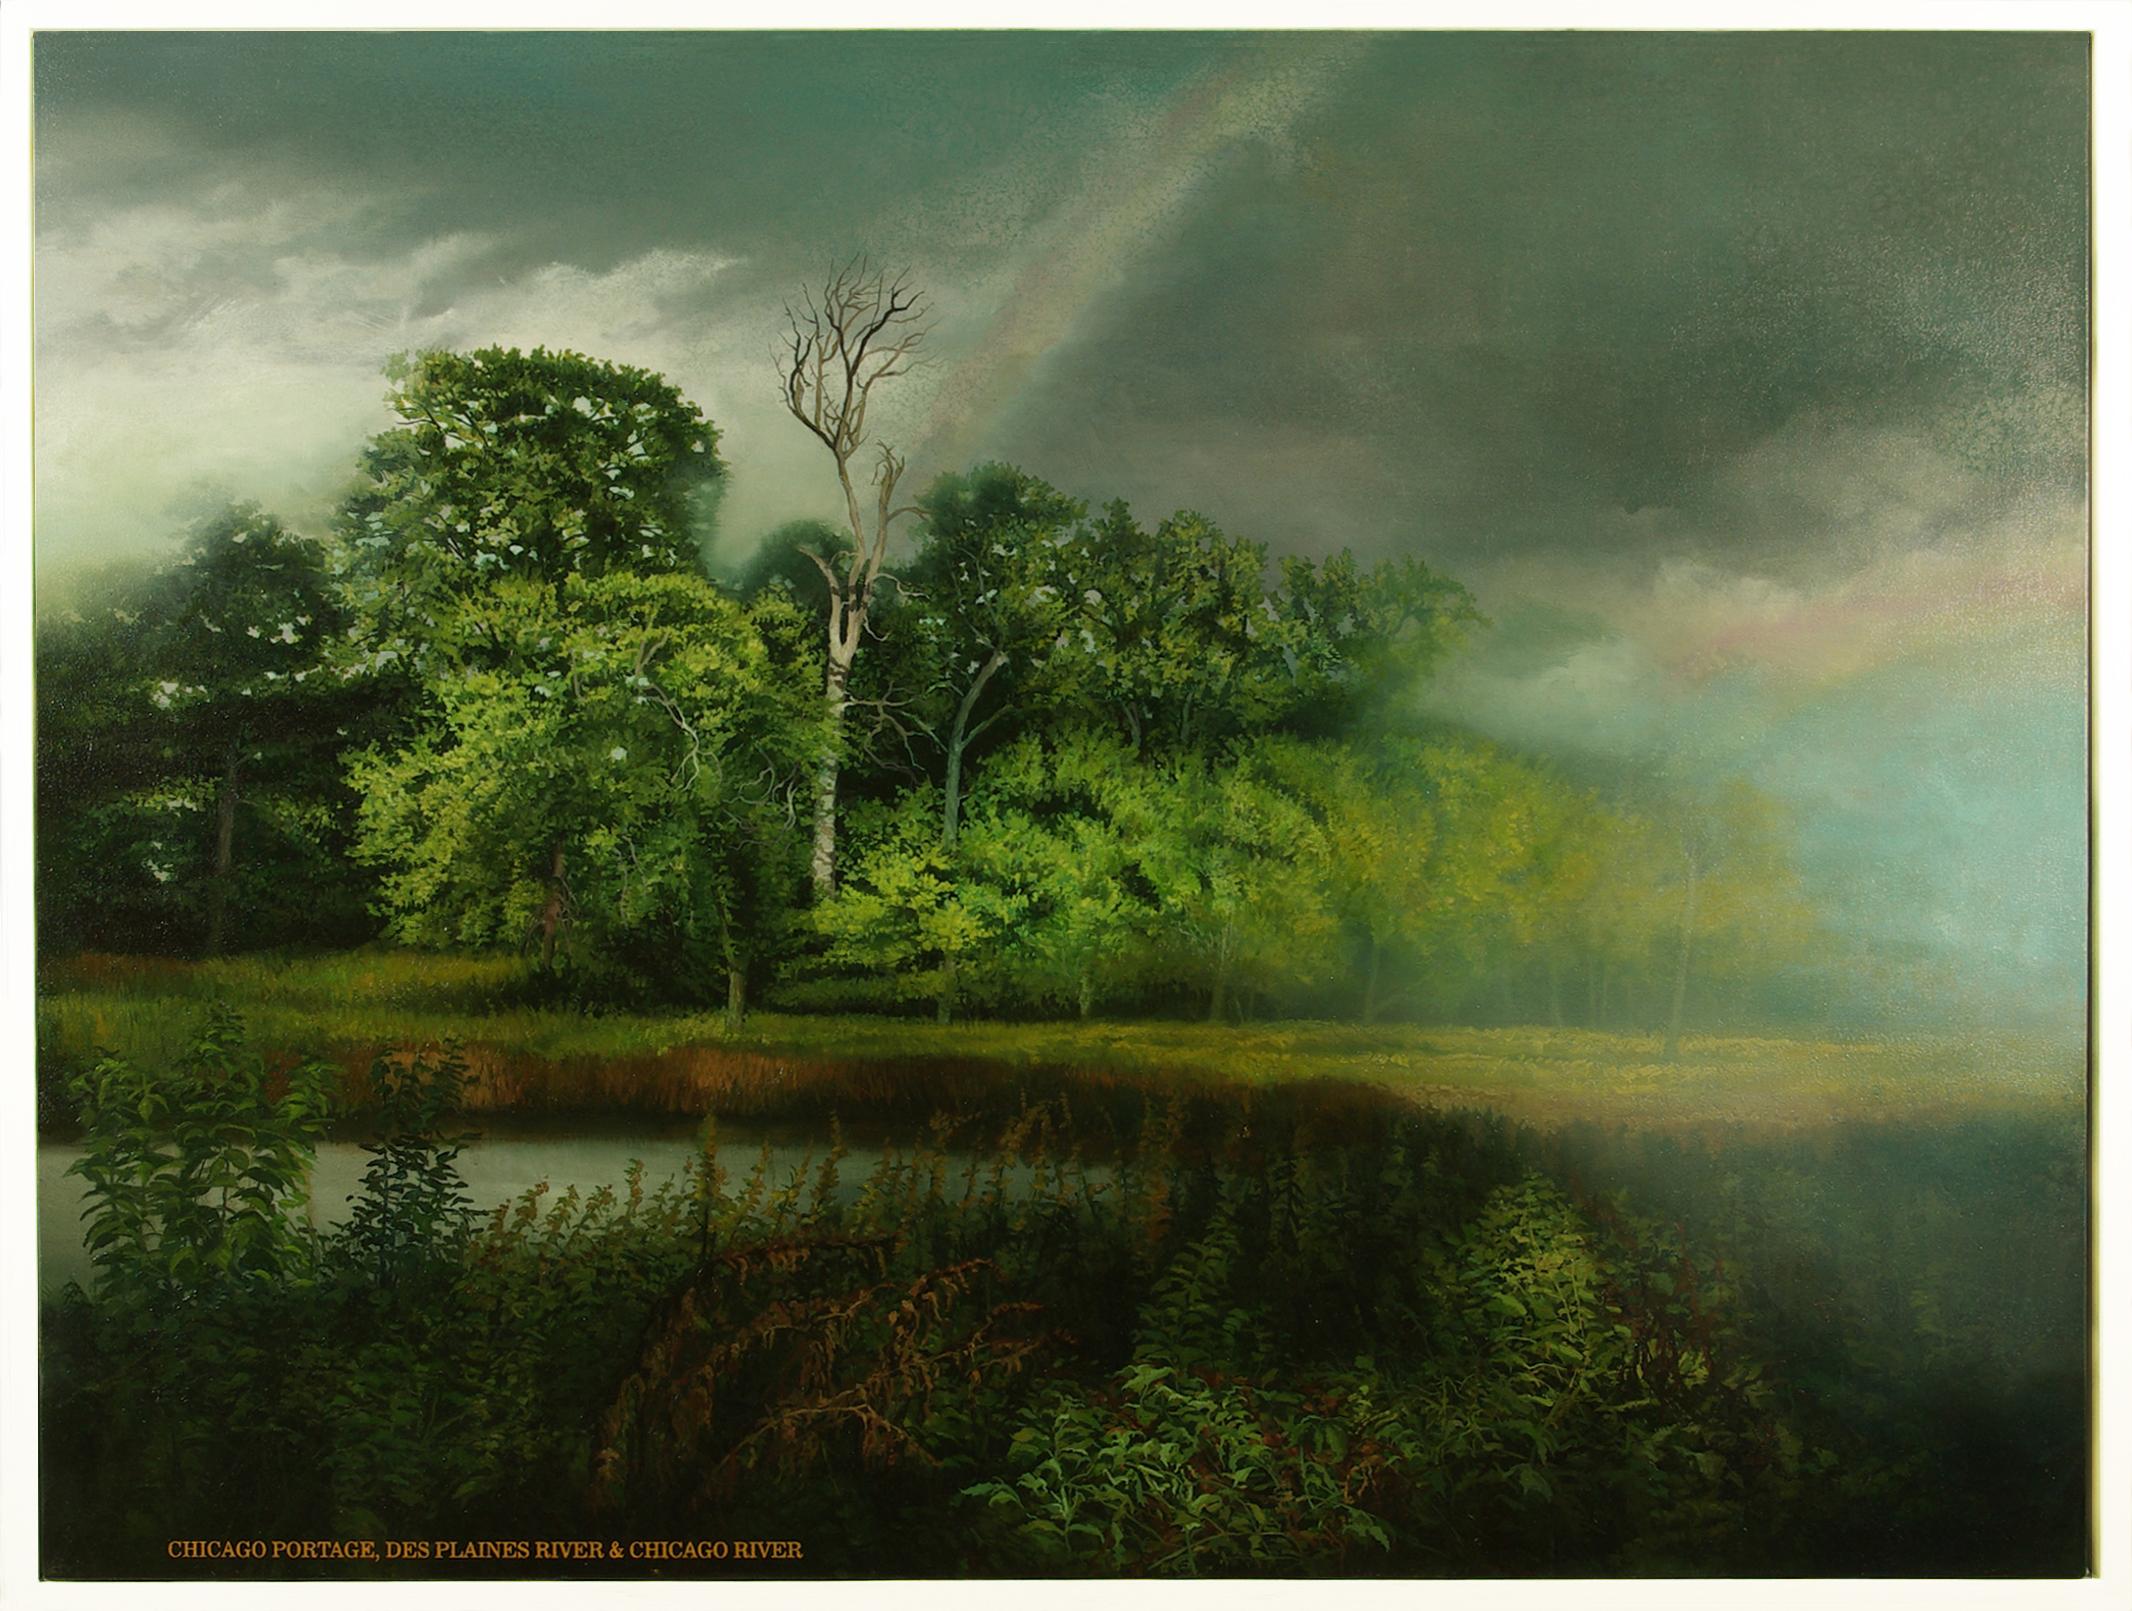 Don Pollack Landscape Painting - Chicago Portage - Serene Wooded Landscape with Stormy Skies, Oil on Canvas